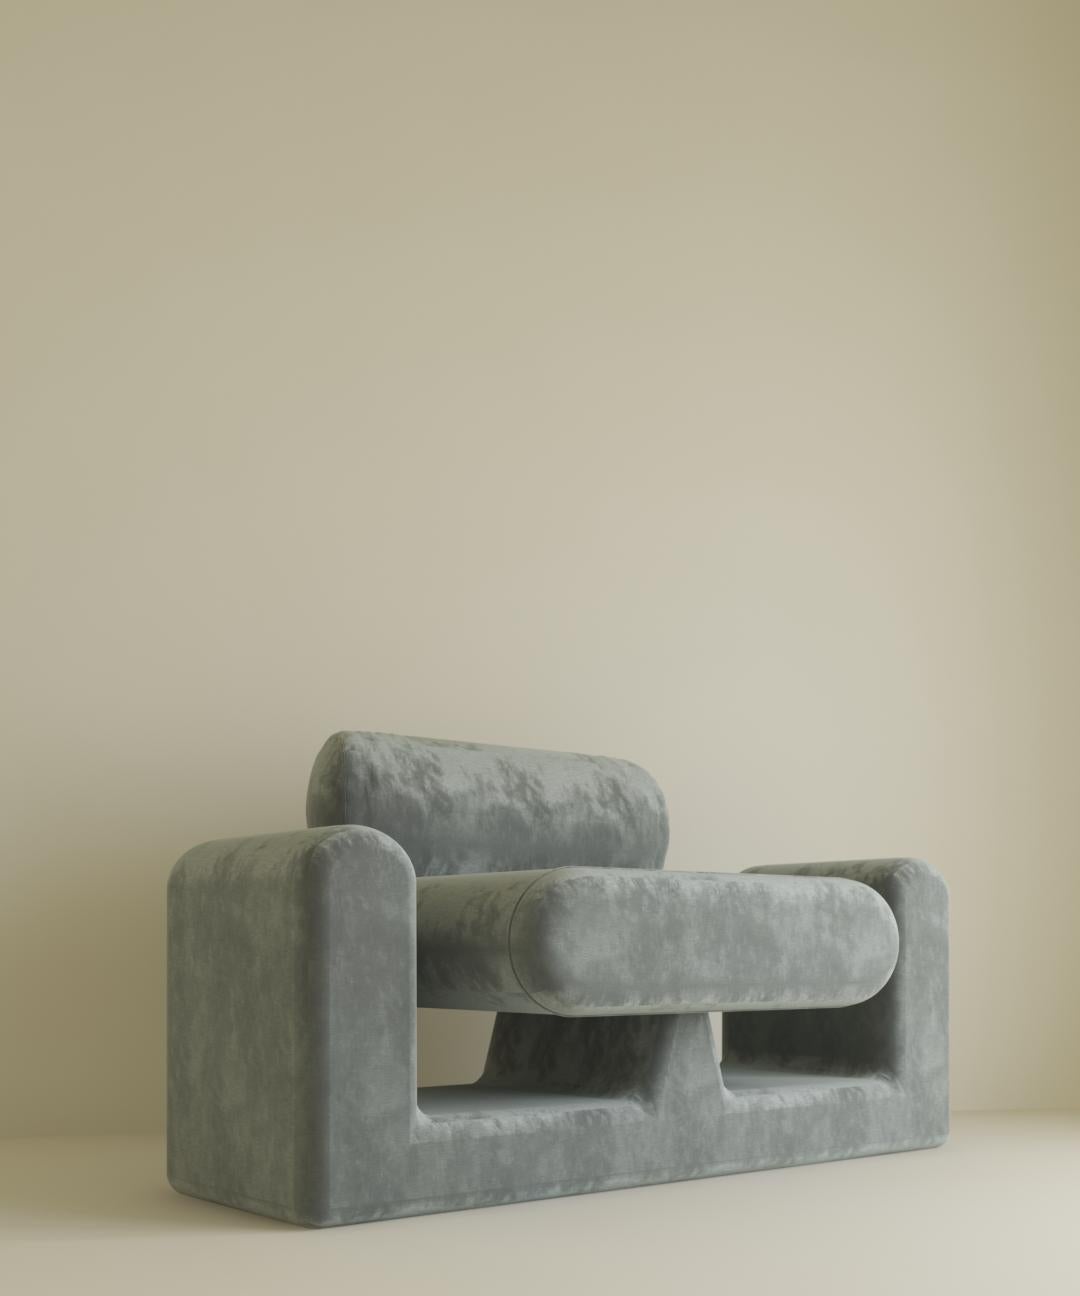 Hug grey chair by Rejo Studio
Dimensions: D 115 x W 70 x H 70 cm
Materials: Wooden structure, with Velvet or silk
Also Available in different colours.

We designed the chair to feel as if you are being embraced by your own world,
in spite of